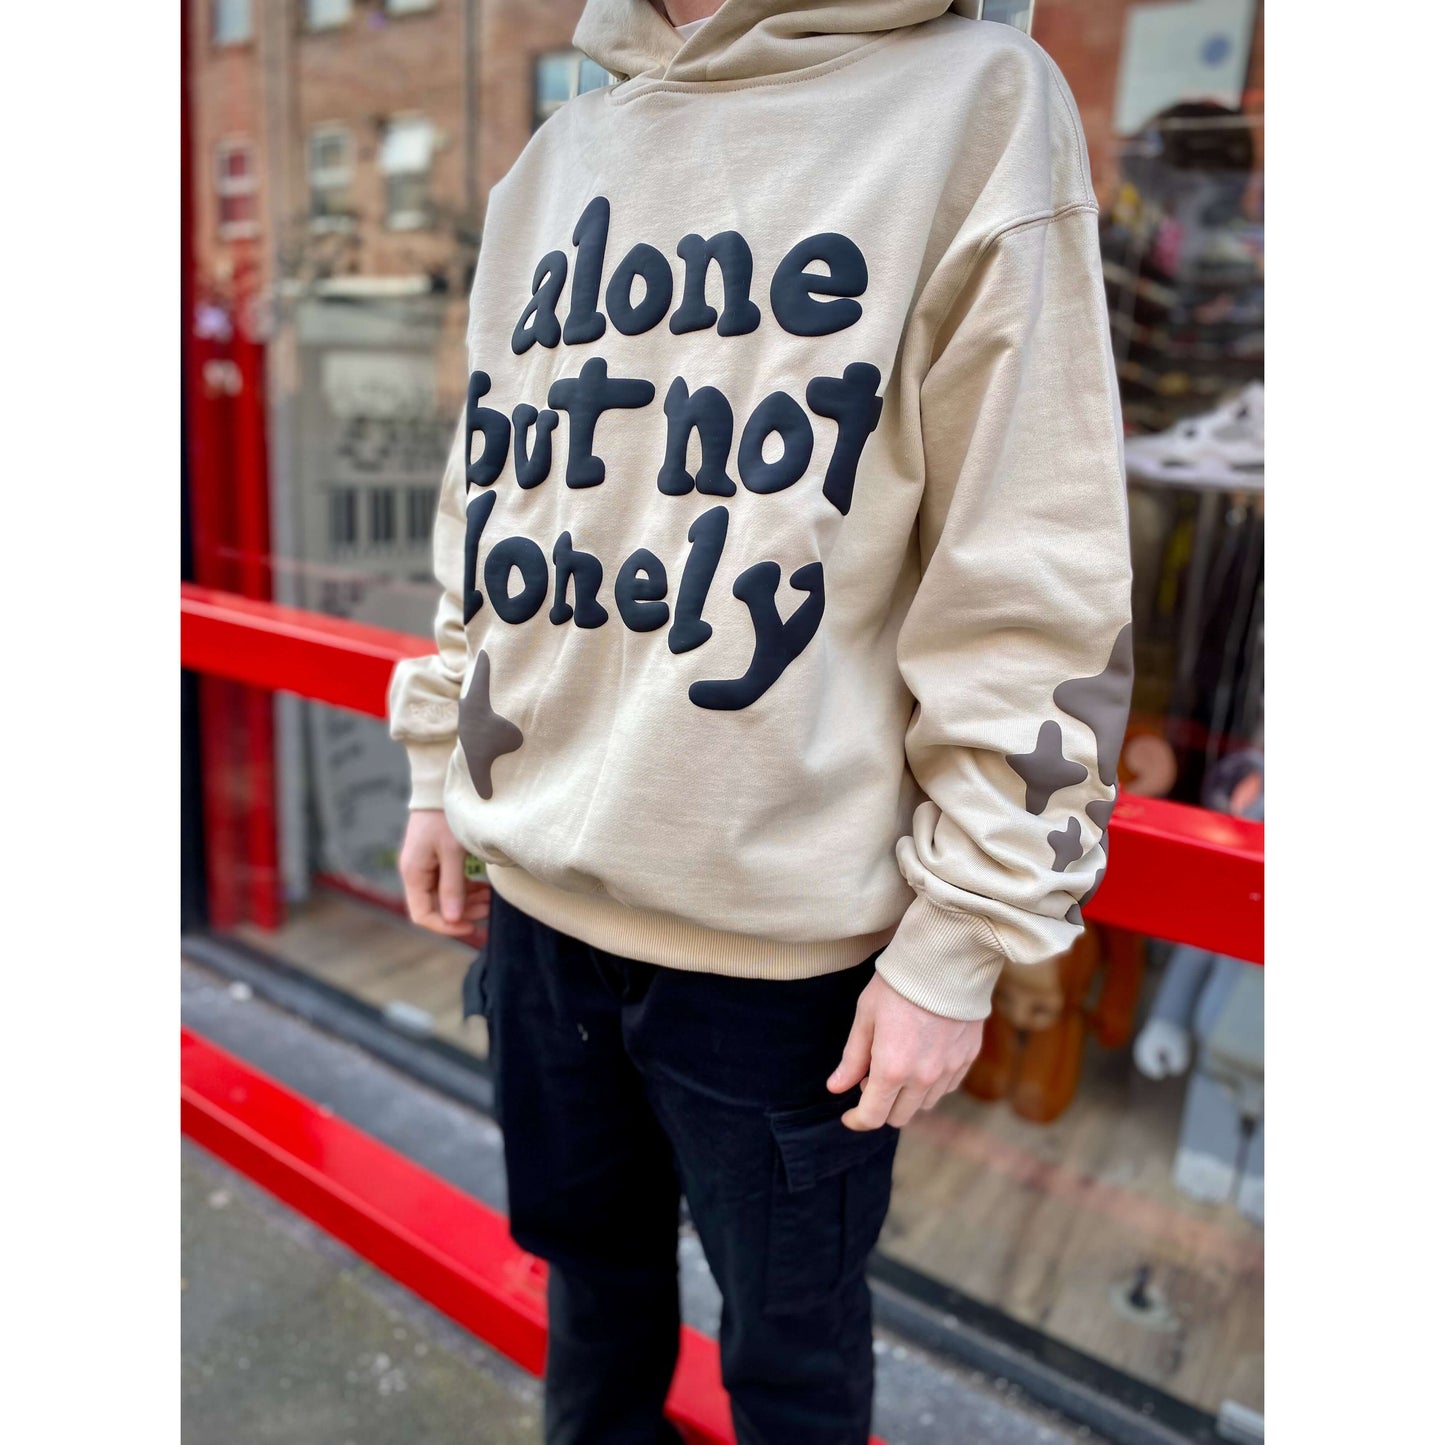 Broken Planet Market Alone But Not Lonely Hoodie White by Broken Planet Market from £165.00